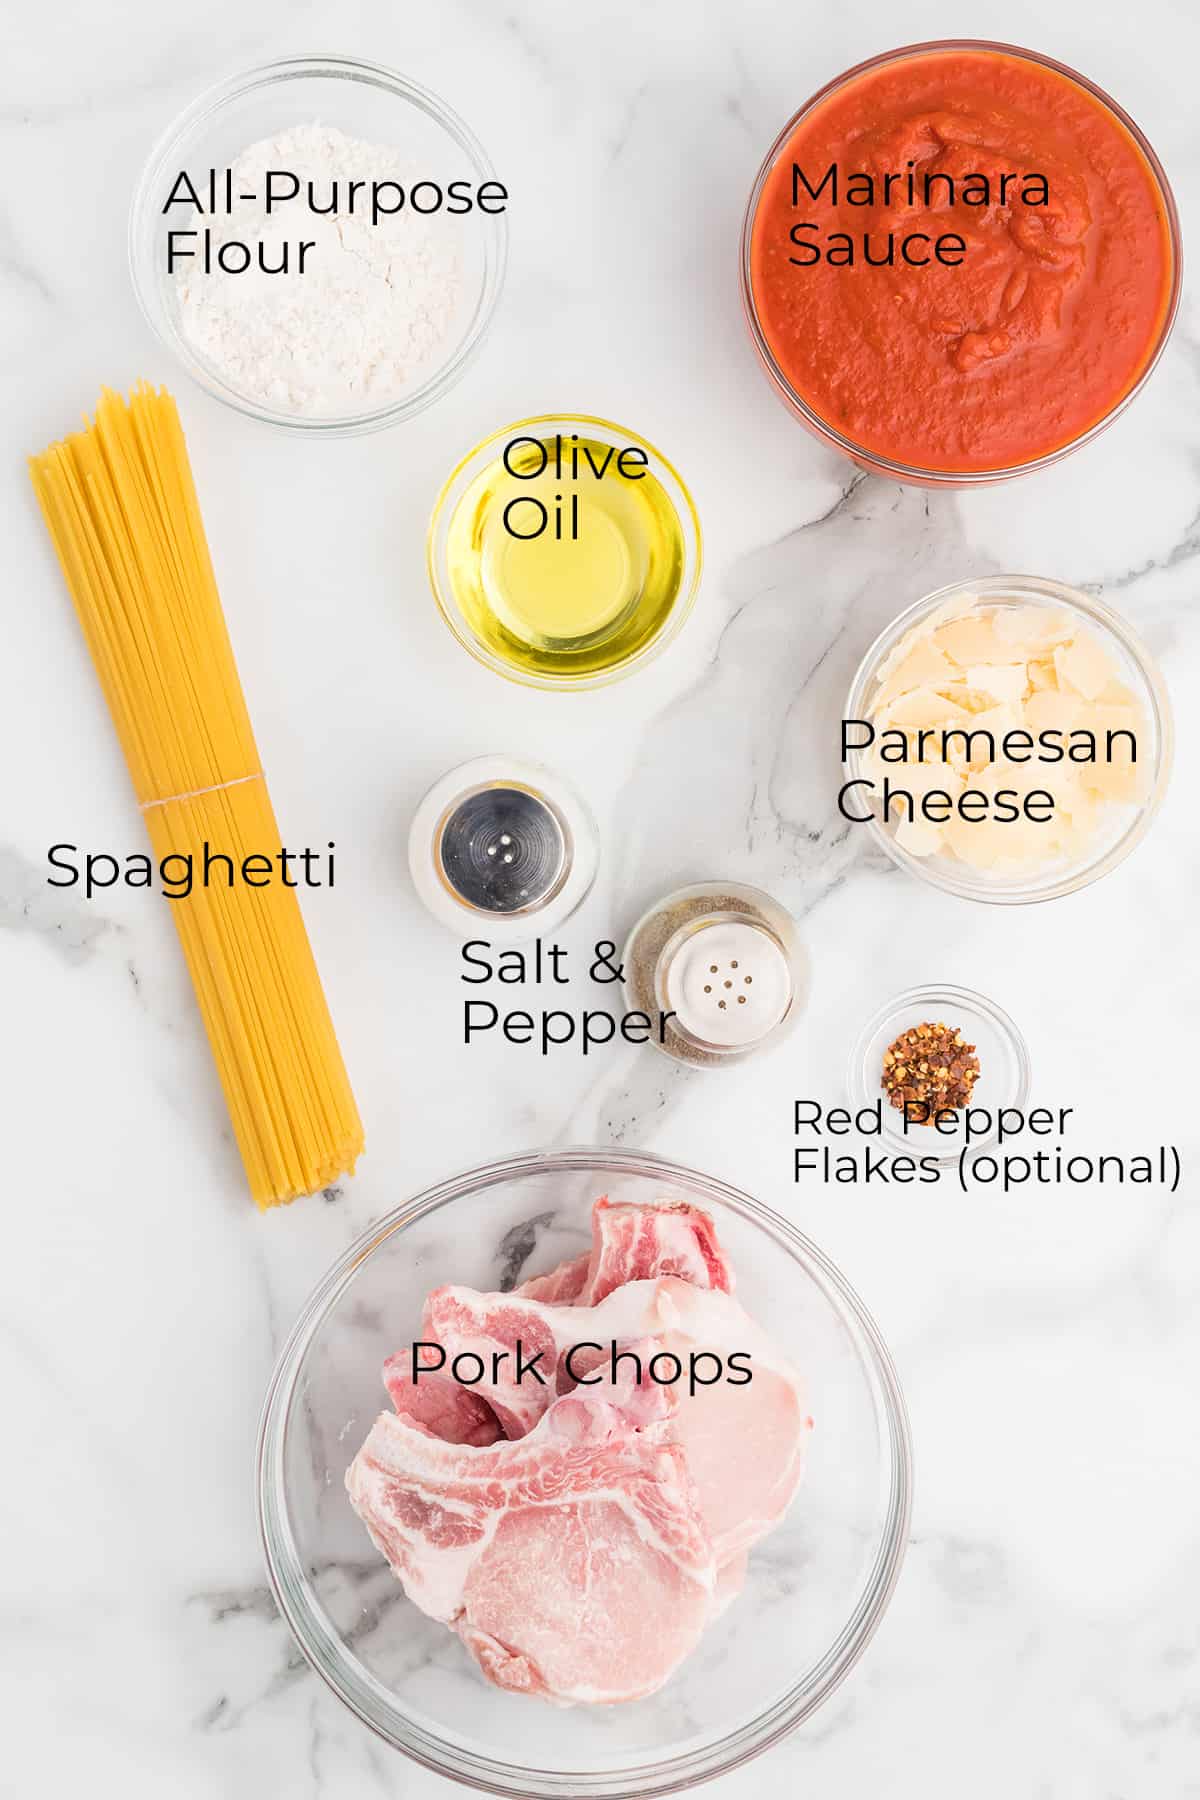 All ingredients needed to make pork chops with pasta.